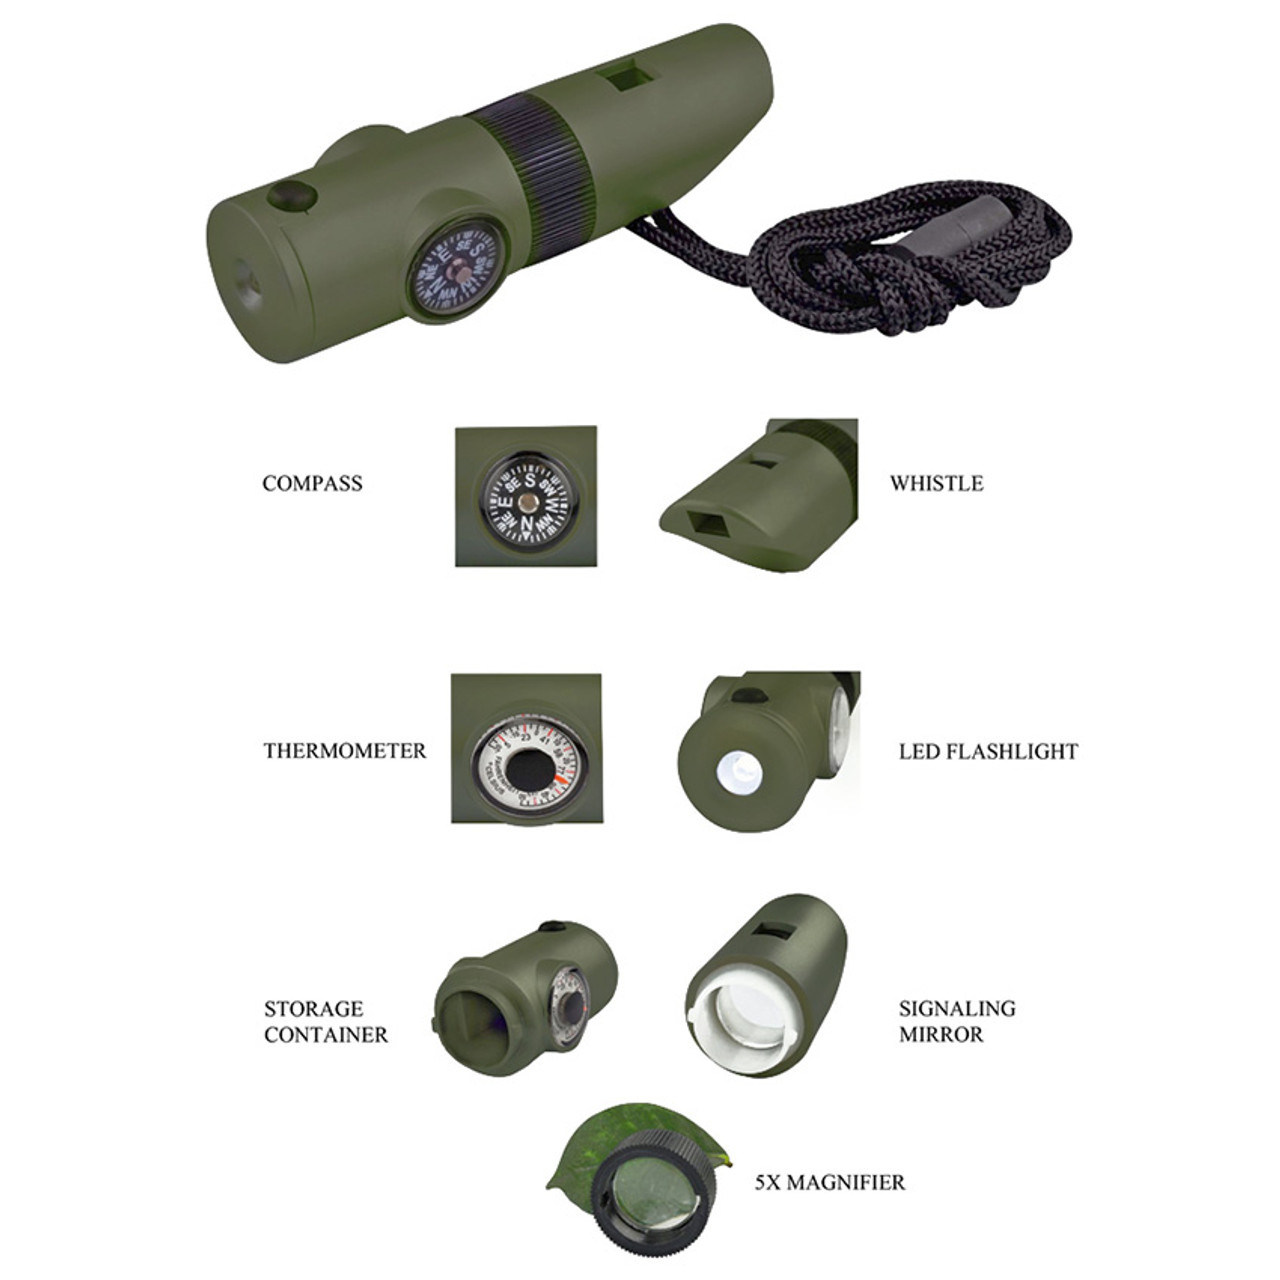 https://cdn11.bigcommerce.com/s-tumf4kk1l4/images/stencil/1280x1280/products/3187/5860/green-7-in-1-survival-whistle-with-led-flashlight-and-compass-21__14142.1640715105.jpg?c=1?imbypass=on